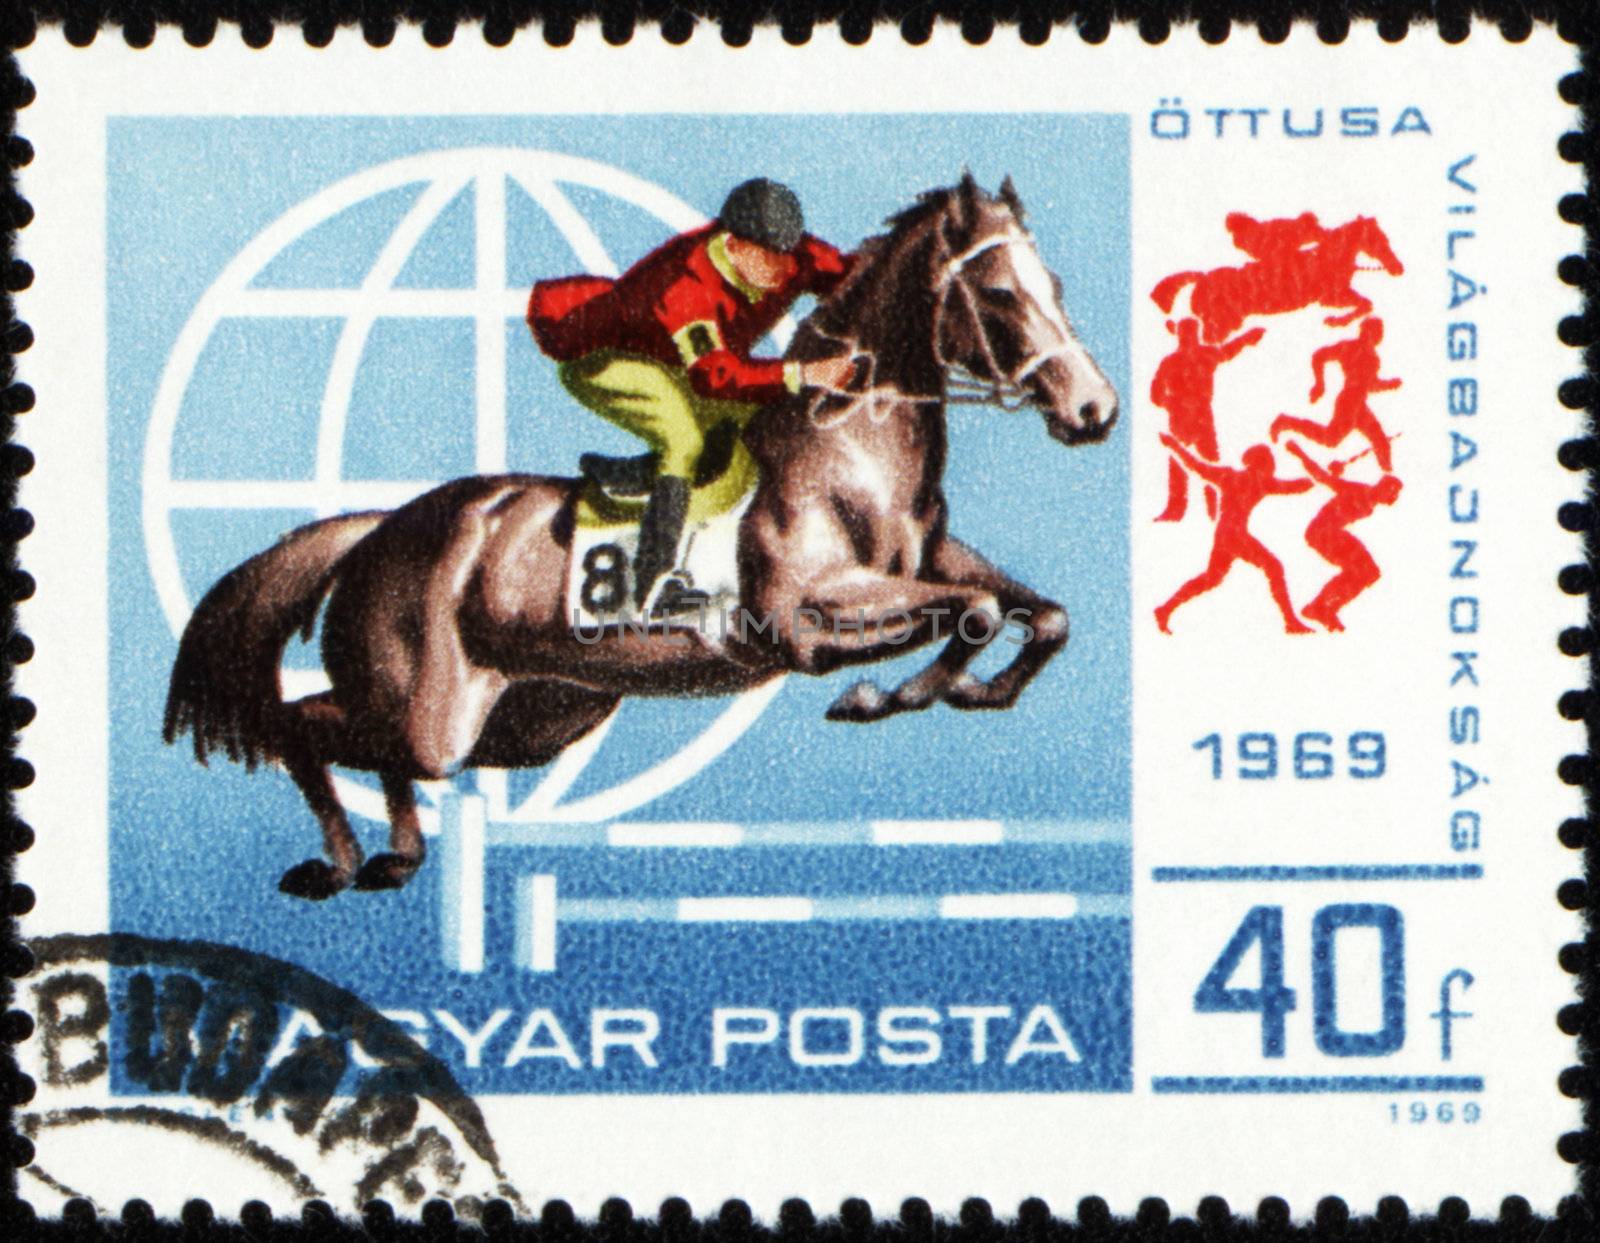 HUNGARY - CIRCA 1969: A stamp printed in Hungary shows horse jumping show, circa 1969